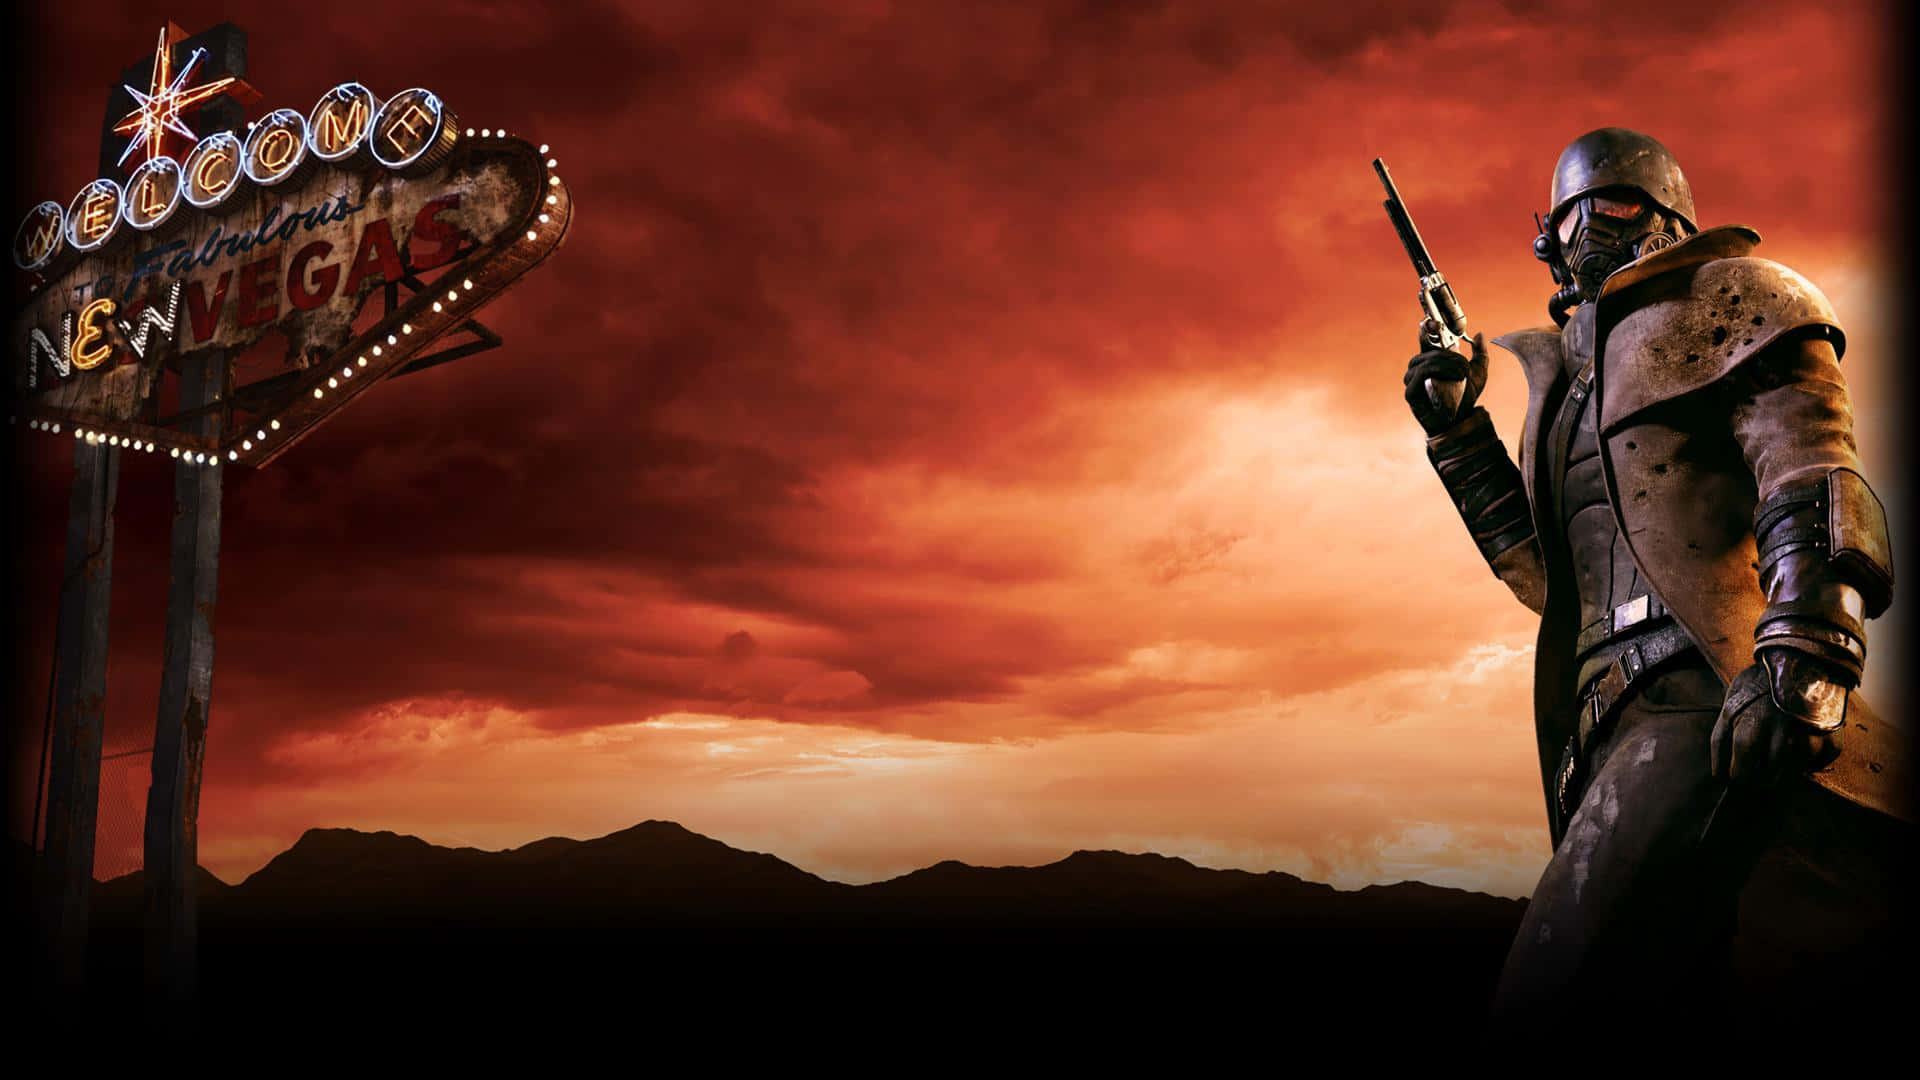 Fallout Nv And Orange Sky Wallpaper